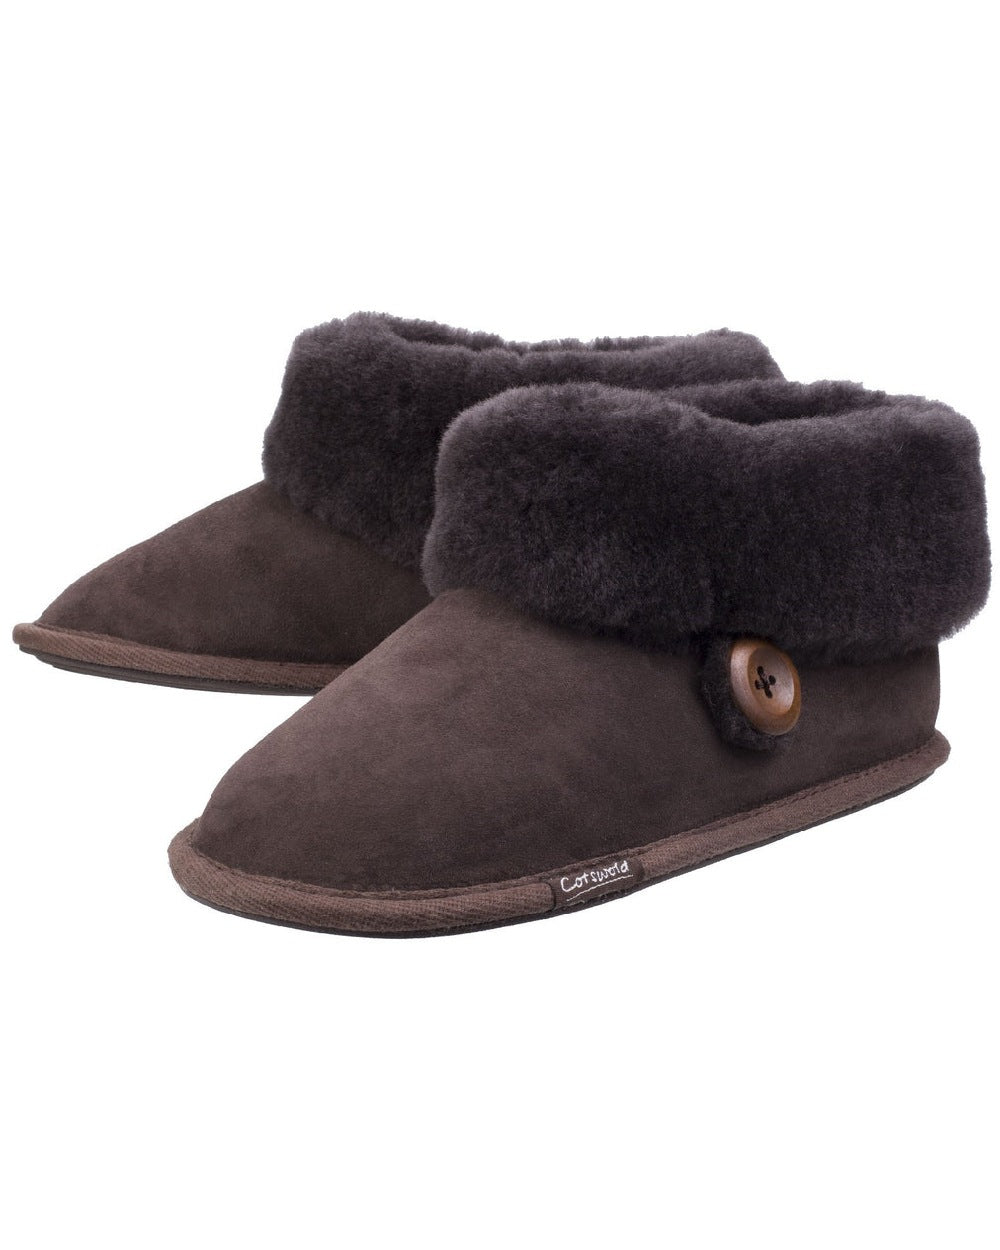 Cotswold Womens Wotton Sheepskin Bootie Slippers in Chocolate 